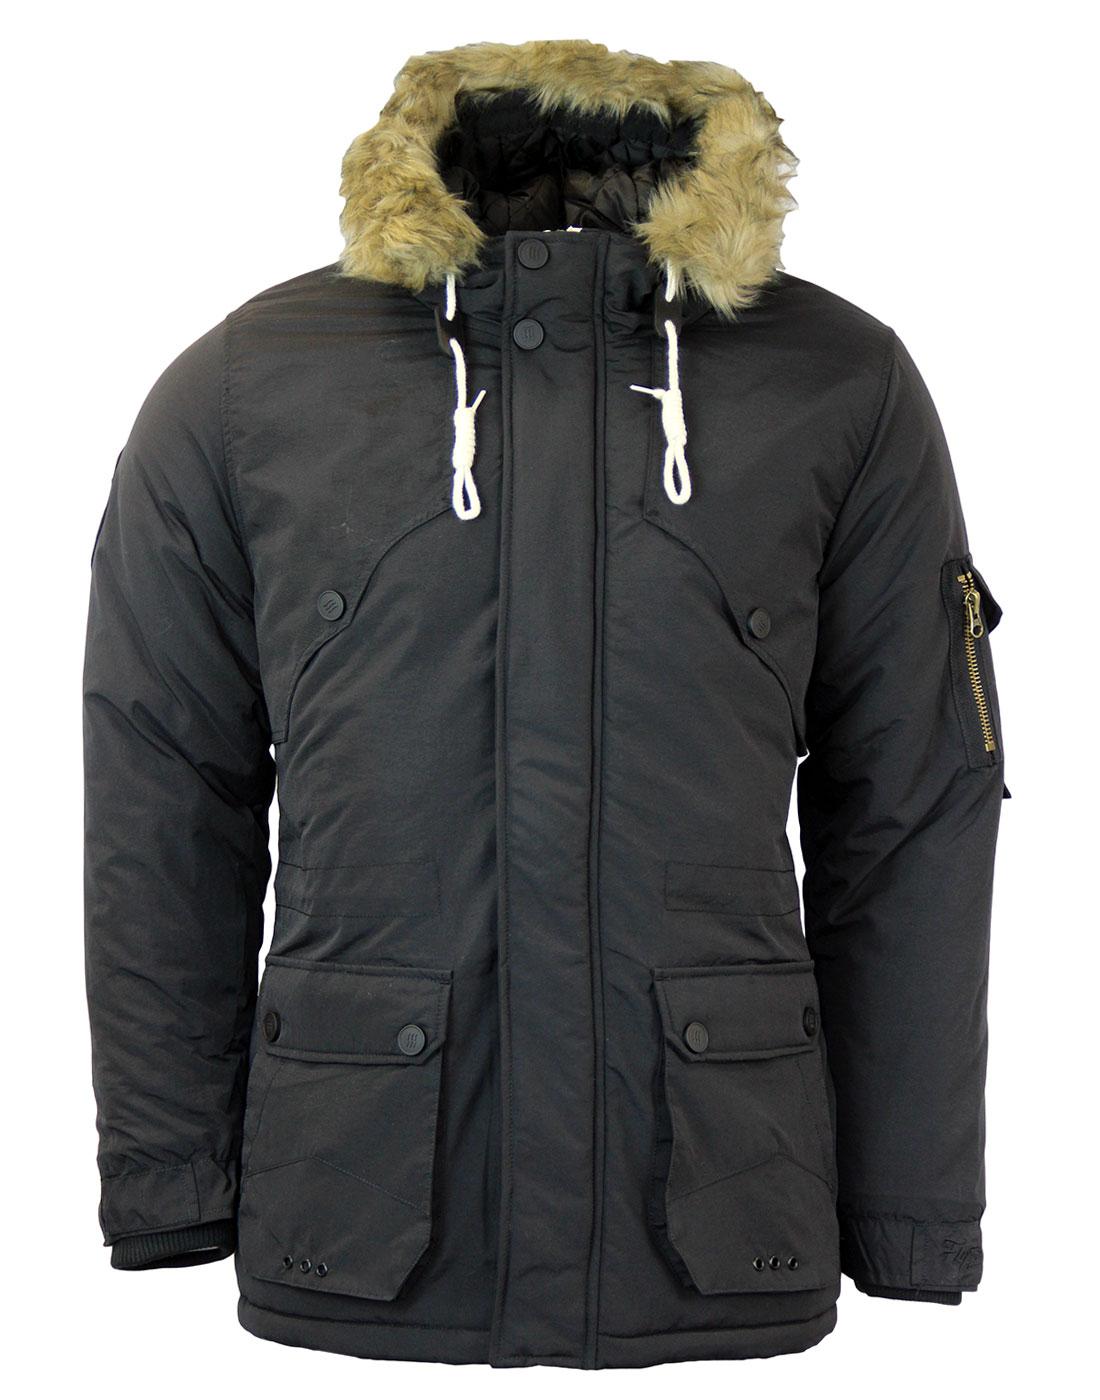 FLY53 Excalibur Mod Fishtail Parka Jacket in Athracite